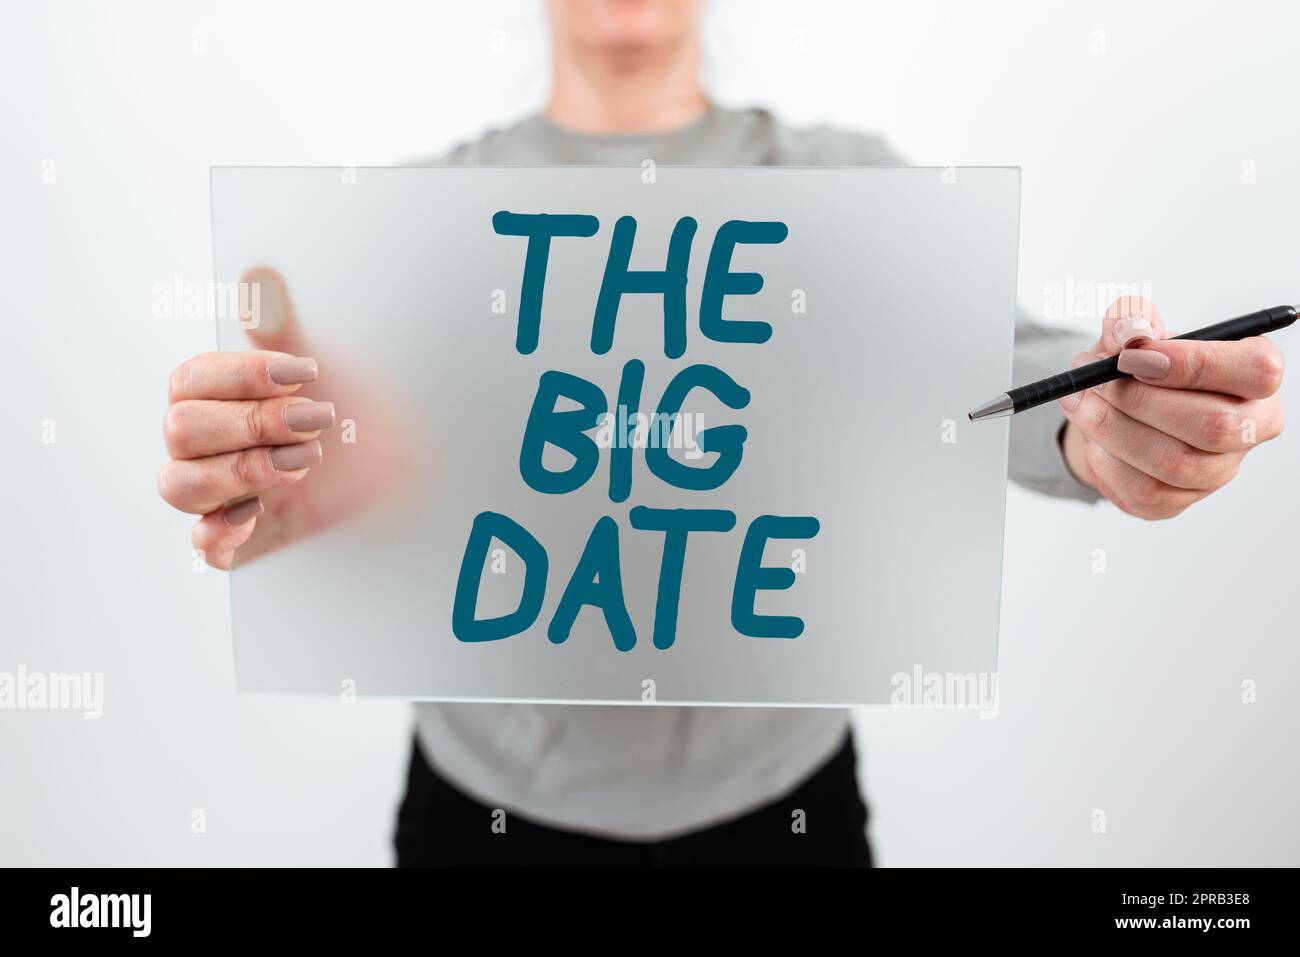 Writing displaying text The Big Date. Business idea Important day for a couple relationship wedding anniversary Woman Holding Pen And Placard Advertising Business For Growth. Stock Photo